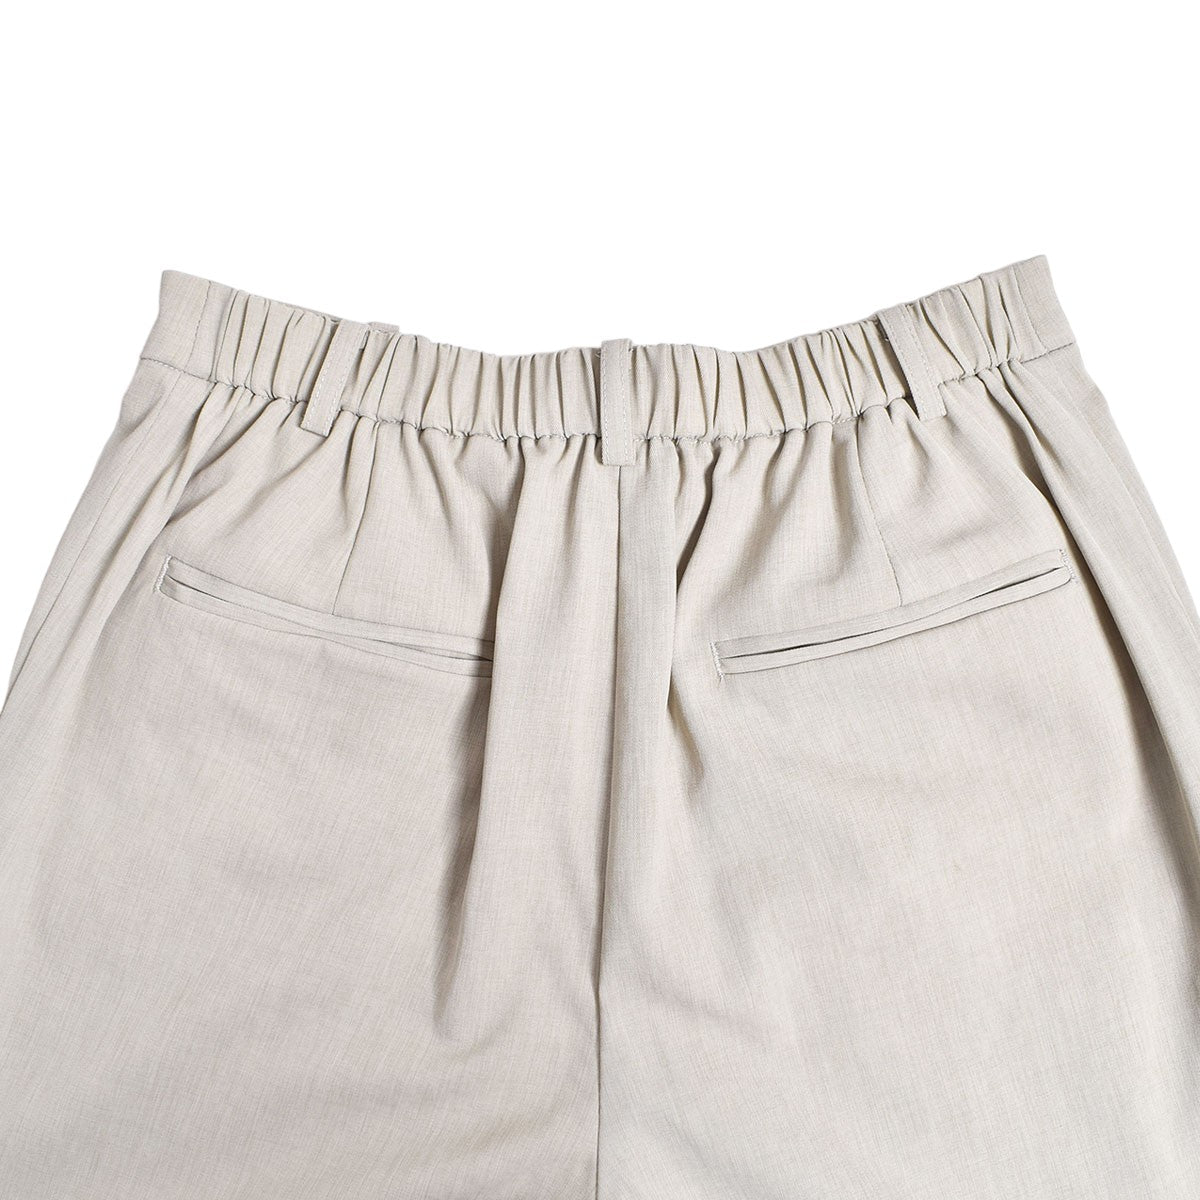 TODAYFUL]Easy Chambray Trousers/BEIGE(12410718) – Ru0026Co.